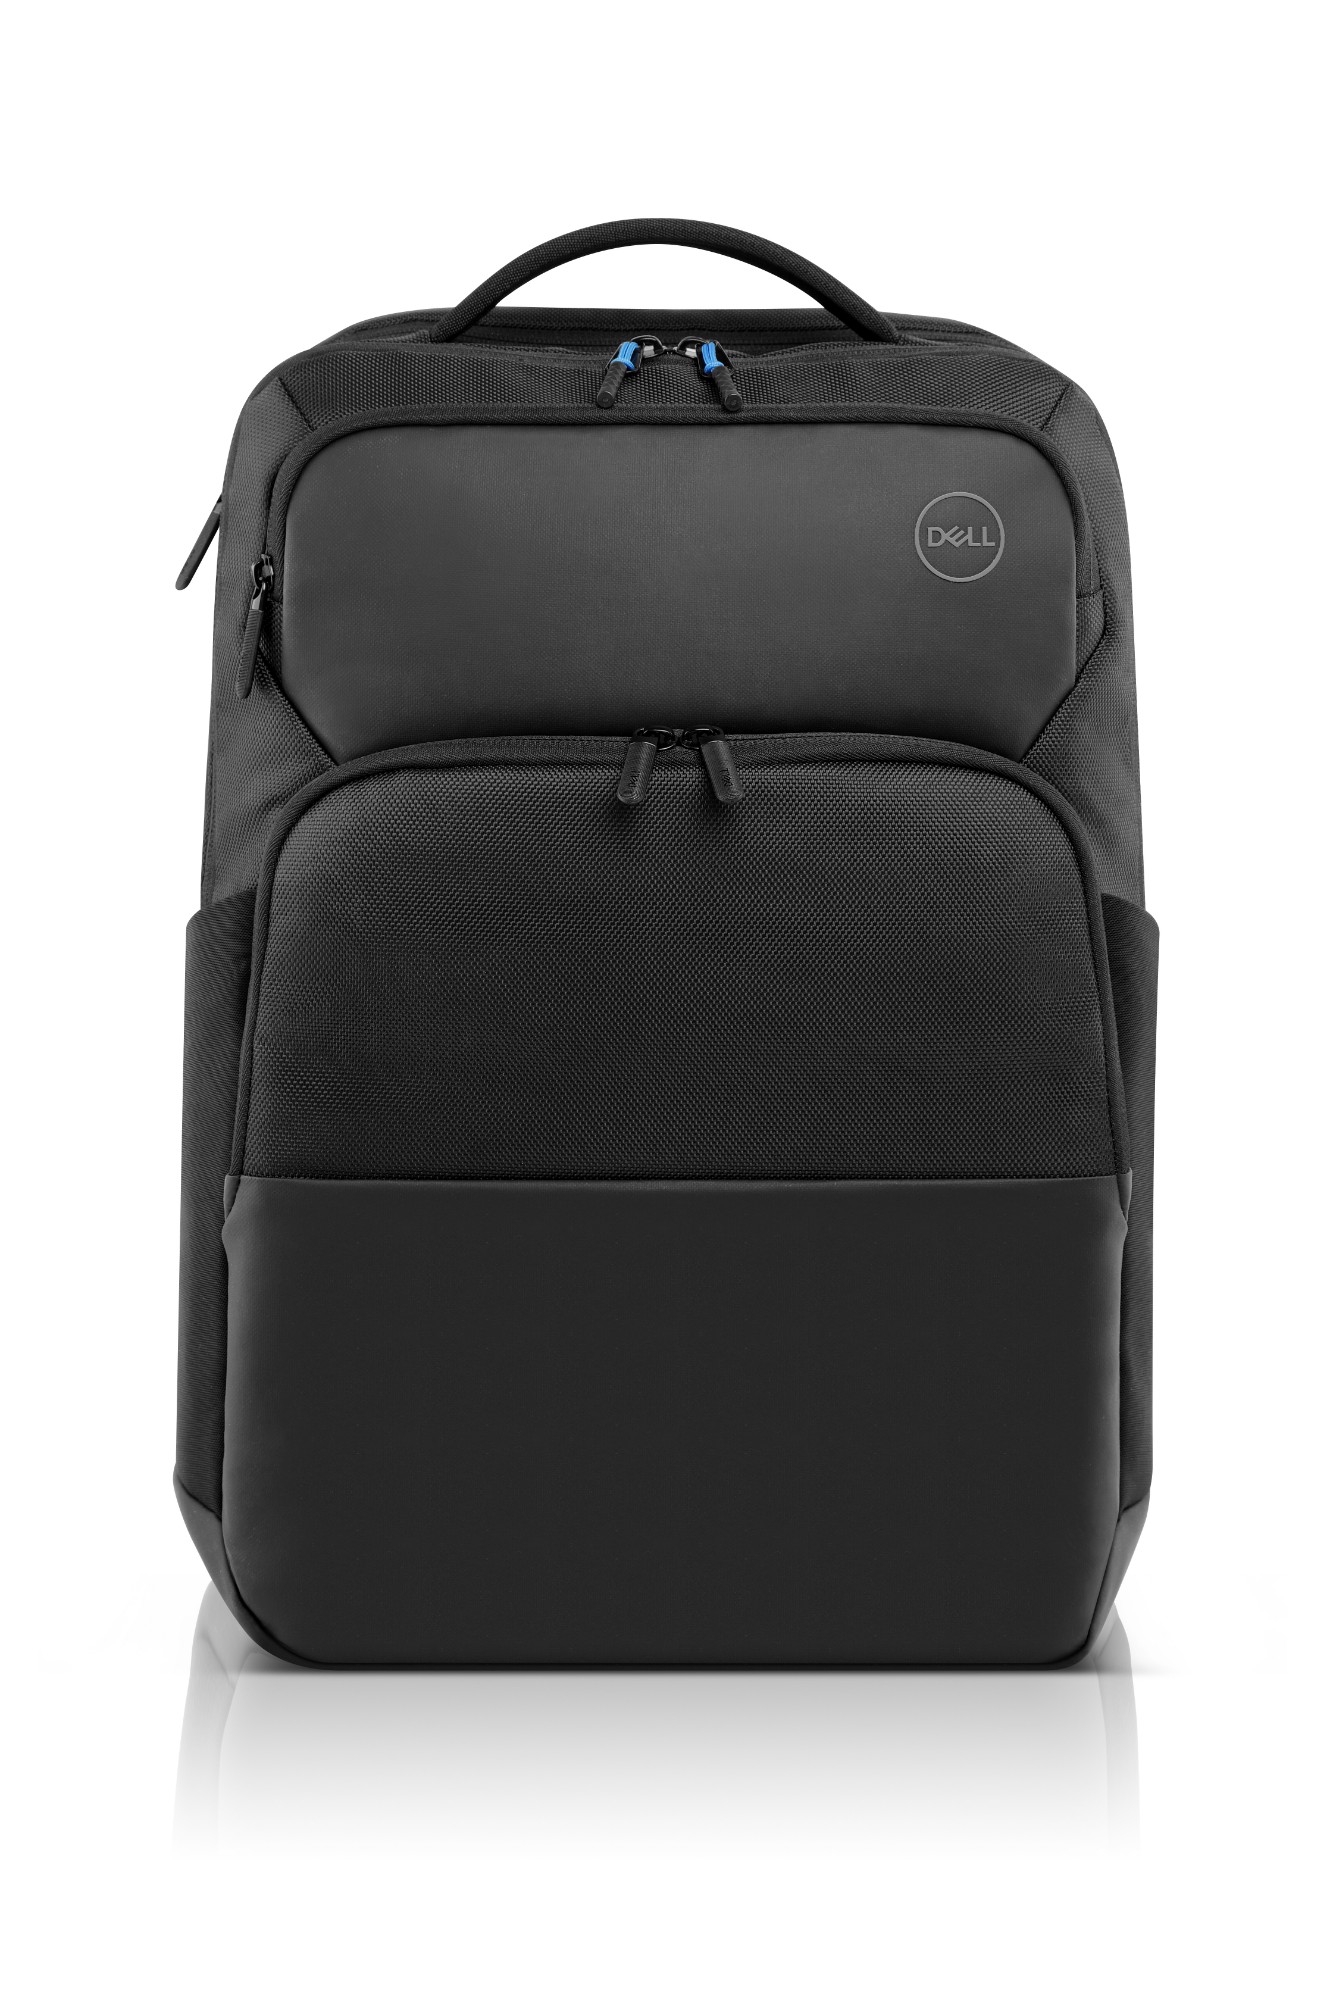 DELL Pro Backpack 17 PO1720P - Laptop Cases - Laptop Accessories